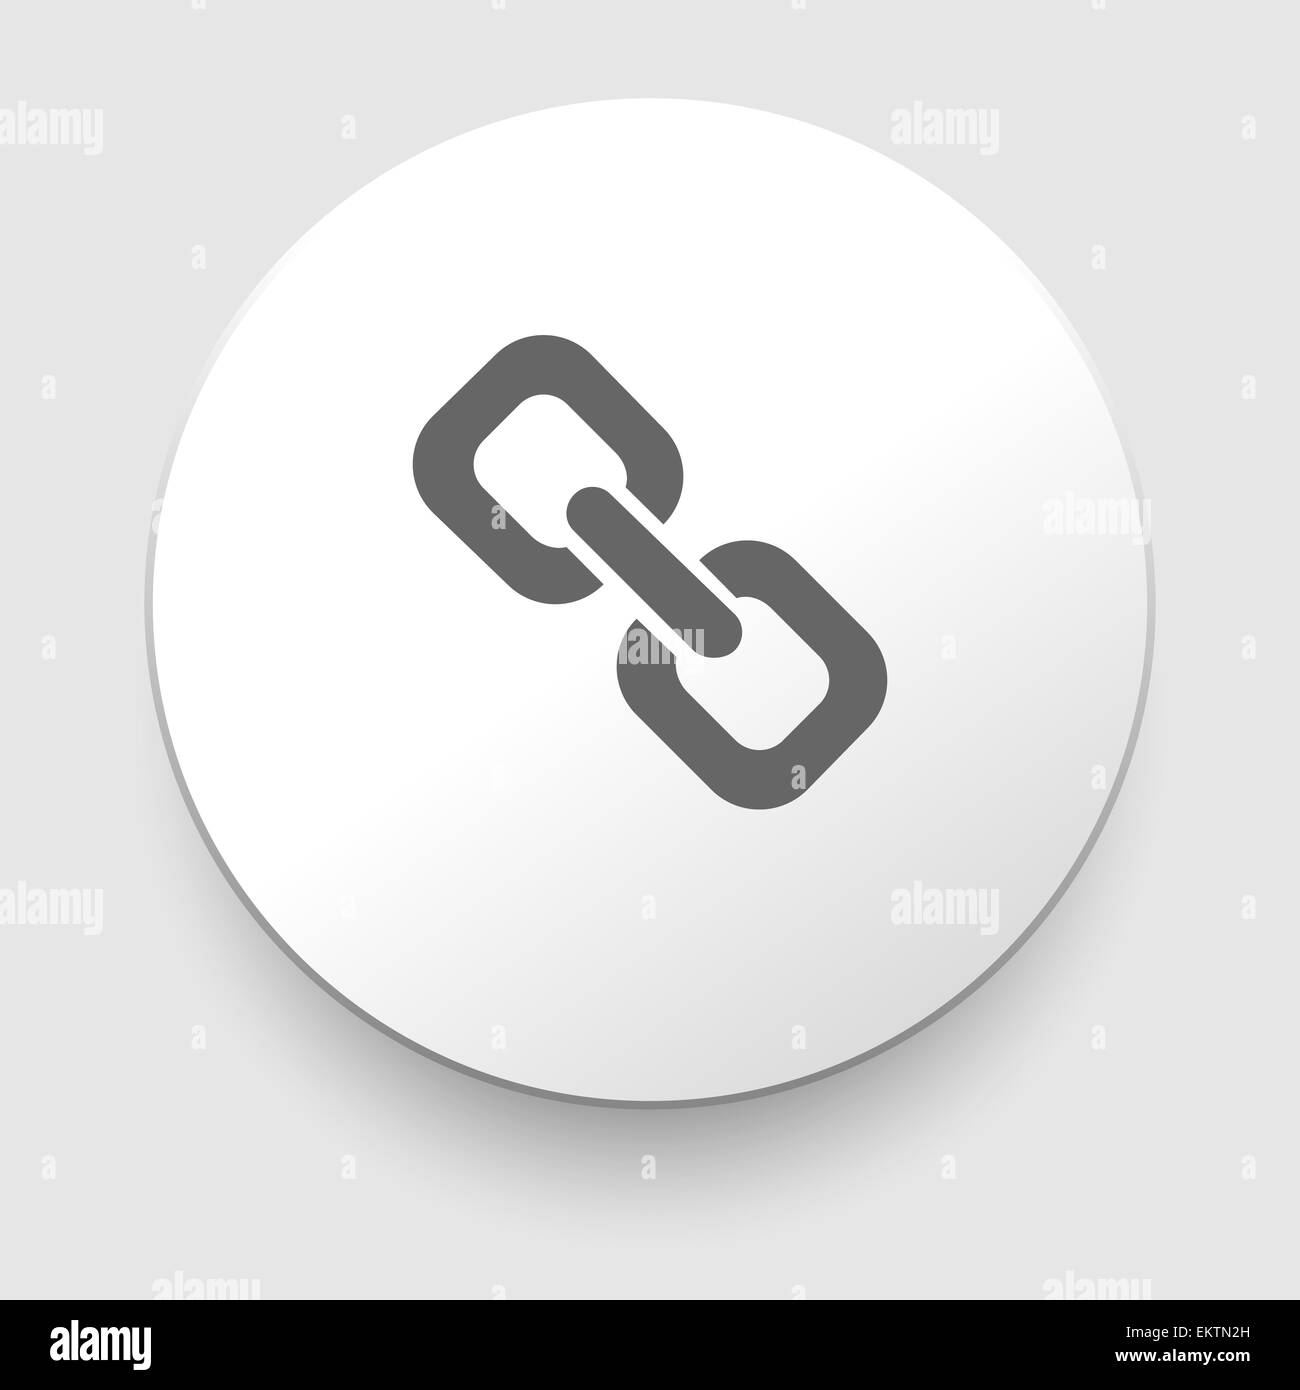 Vector chain or link icon Stock Photo